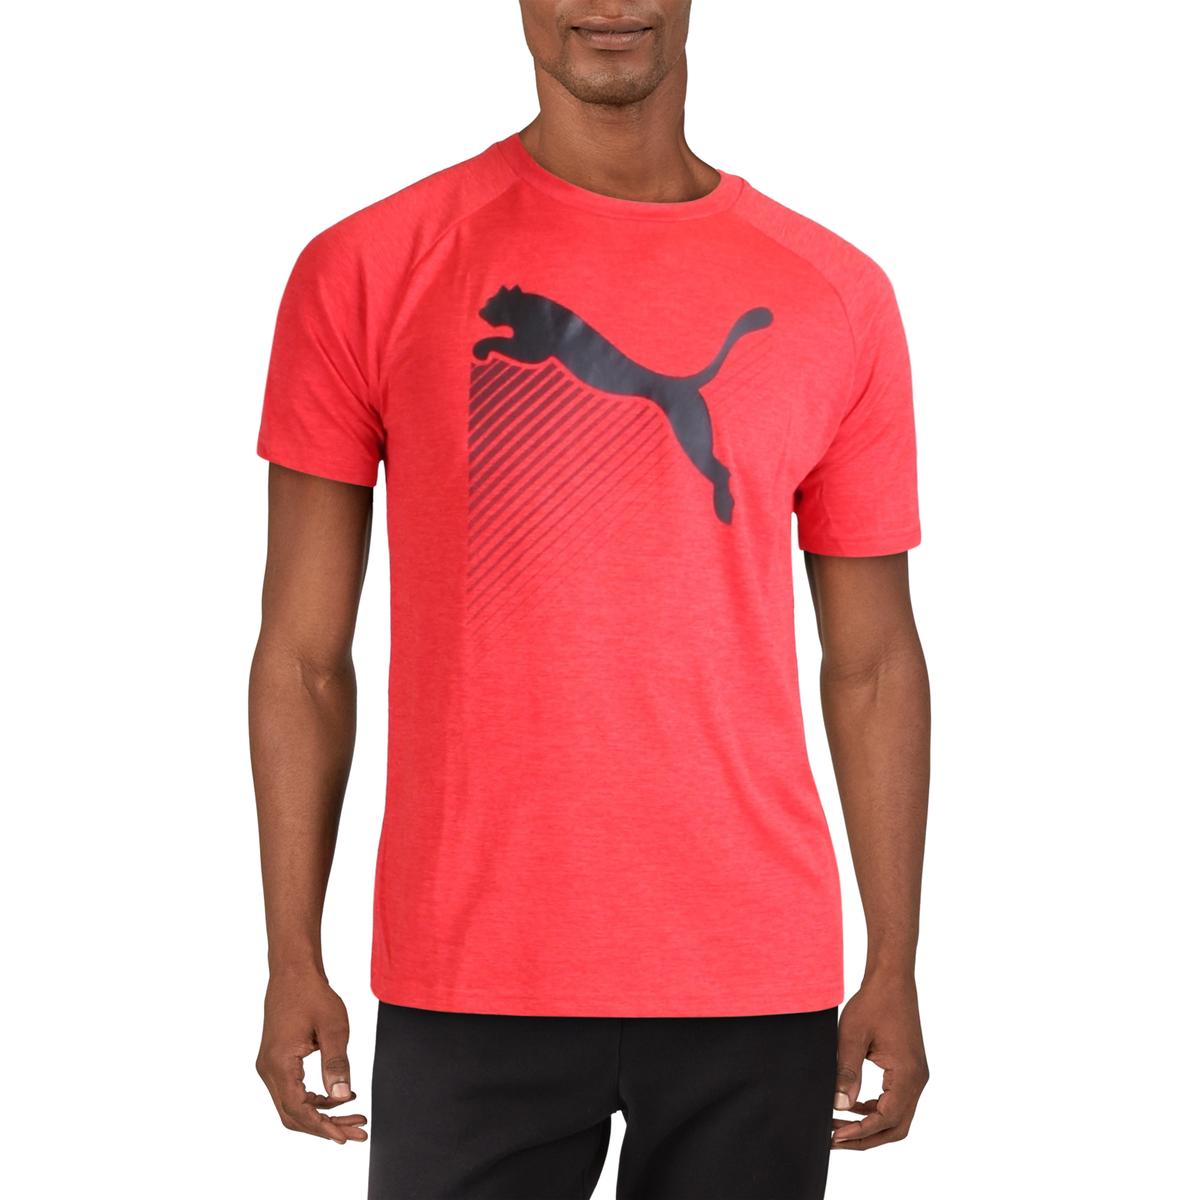 Puma Mens Red Running Fitness Workout T-Shirt Athletic S BHFO 0047 192339437777 | eBay